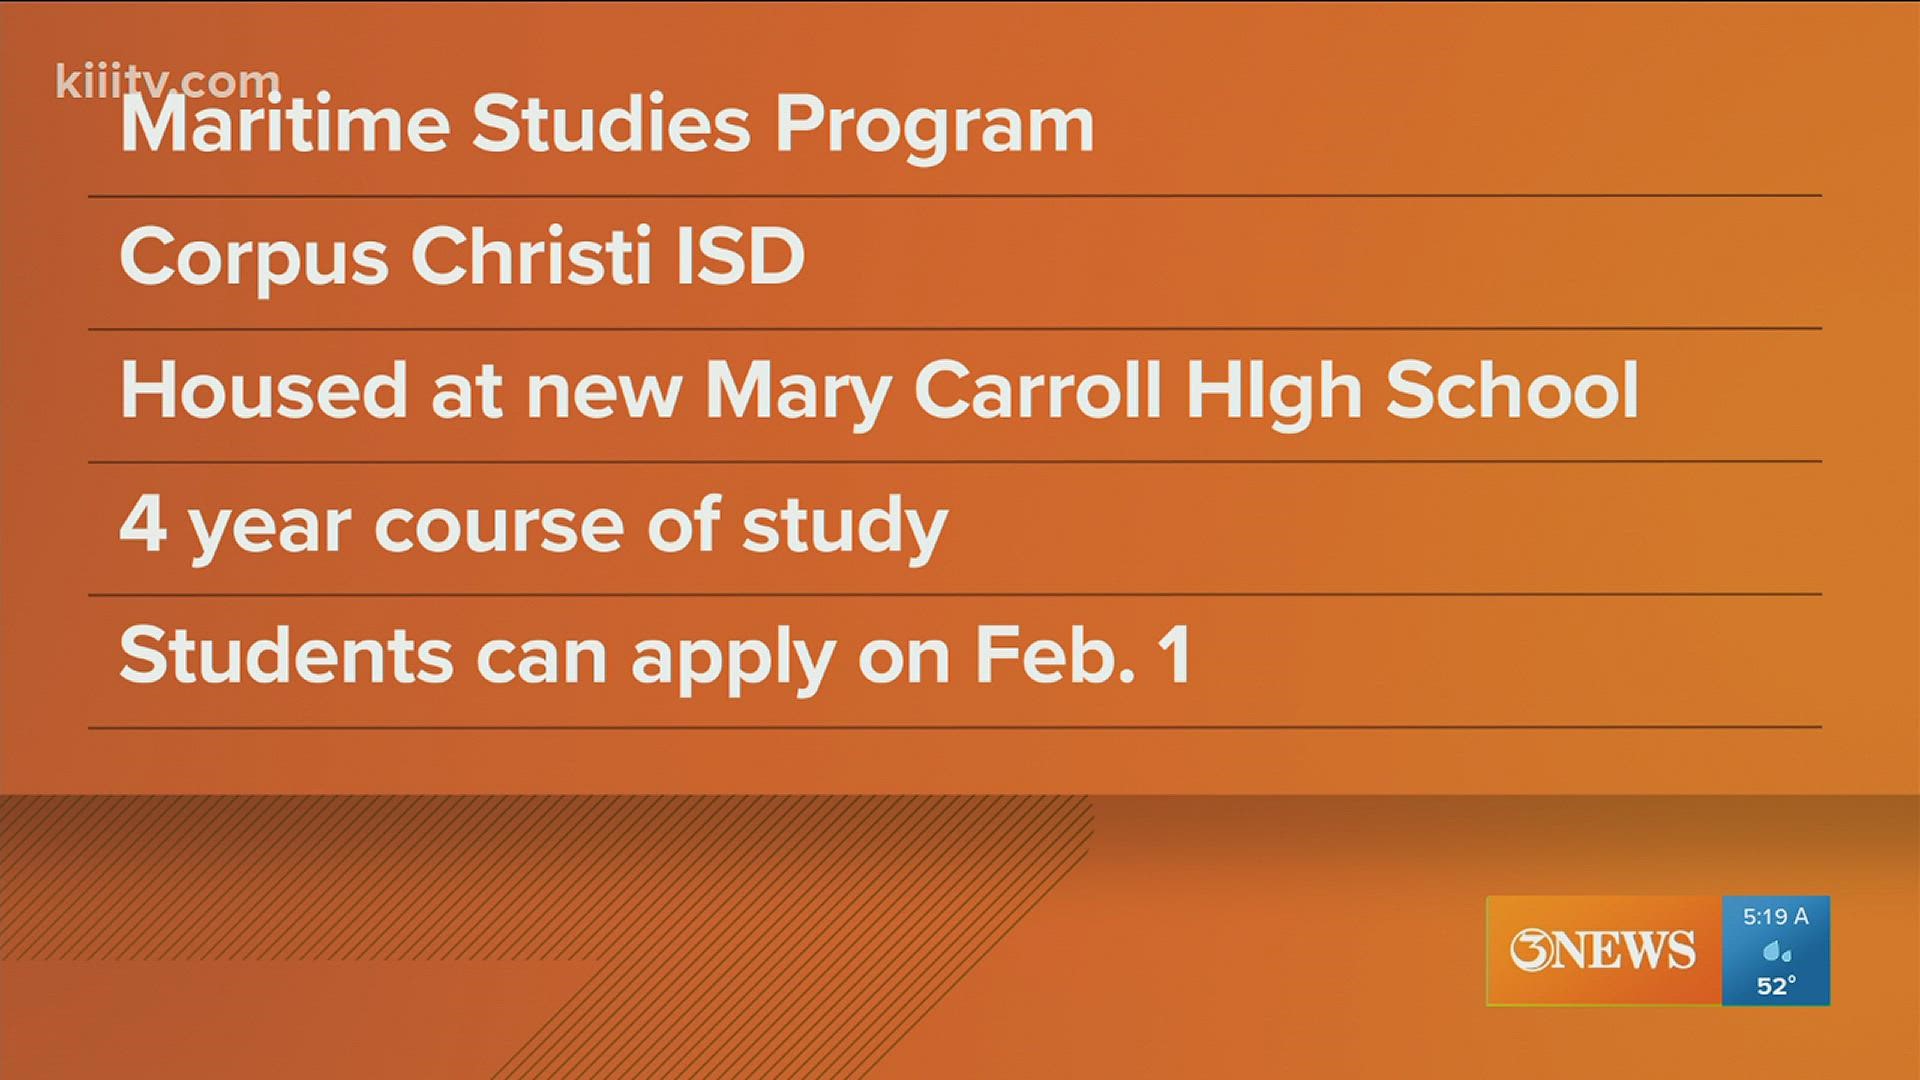 The new program offers a comprehensive 4-year education. Students can begin applying Feb. 1st